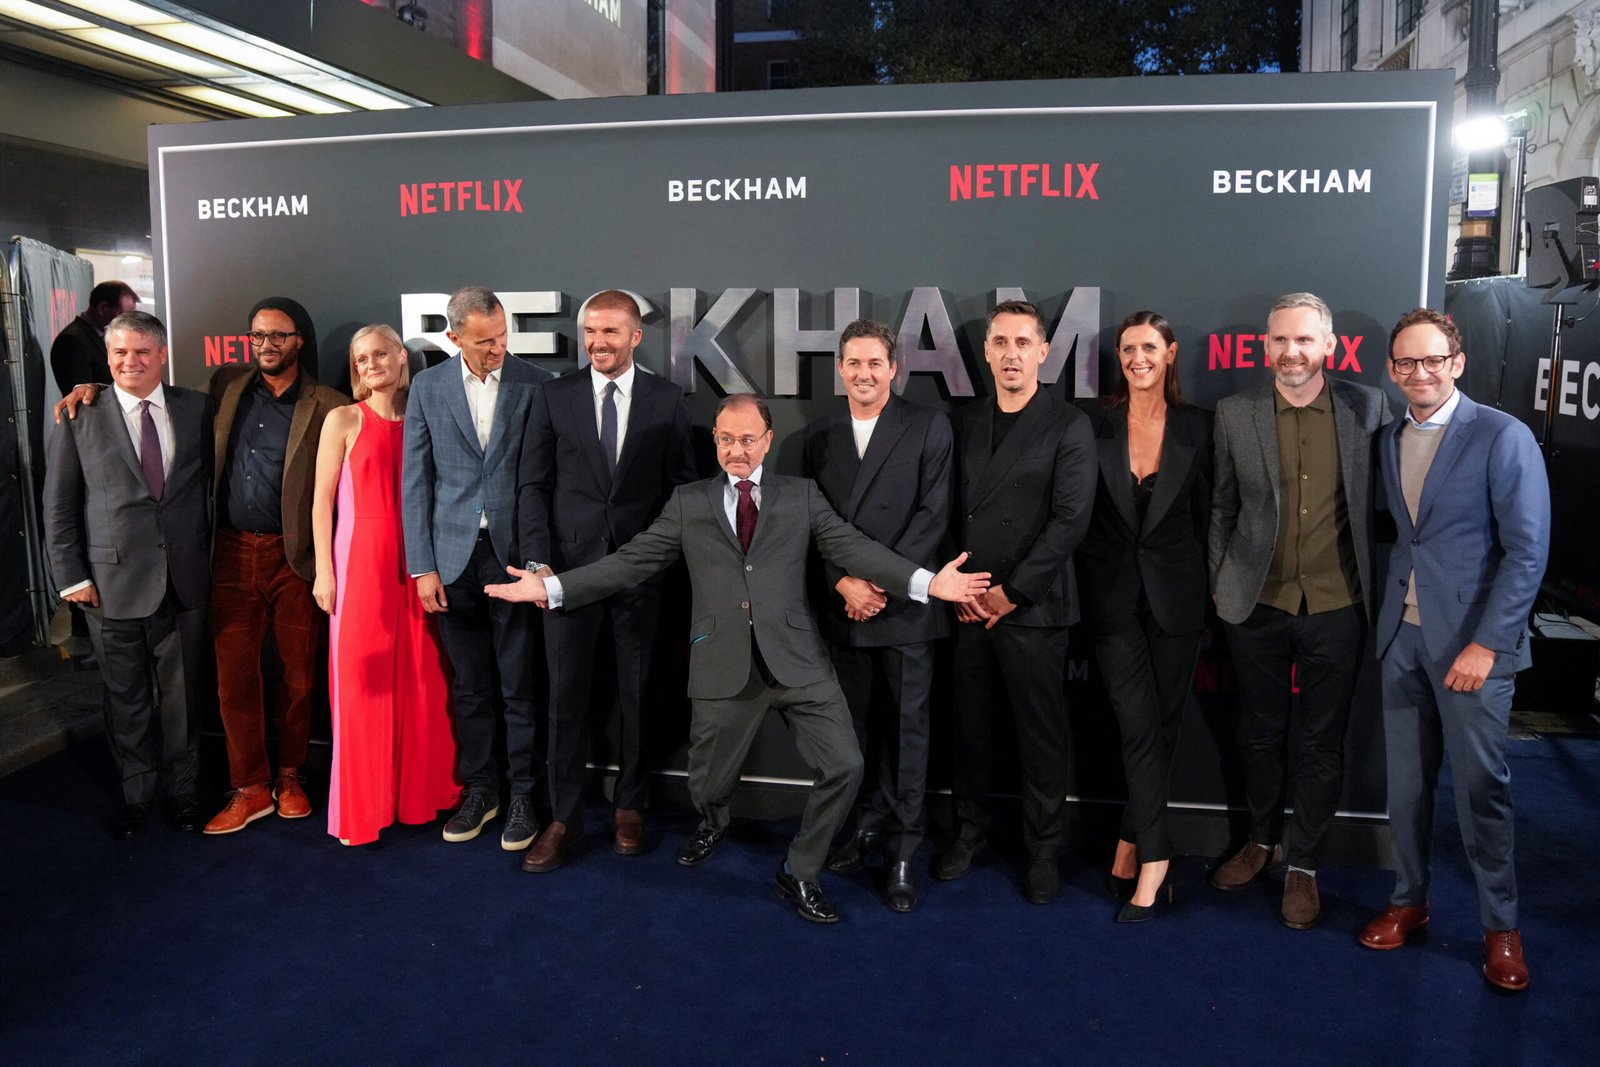 david-beckham-takes-family-to-premiere-of-candid-new-netflix-documentary-about-his-life